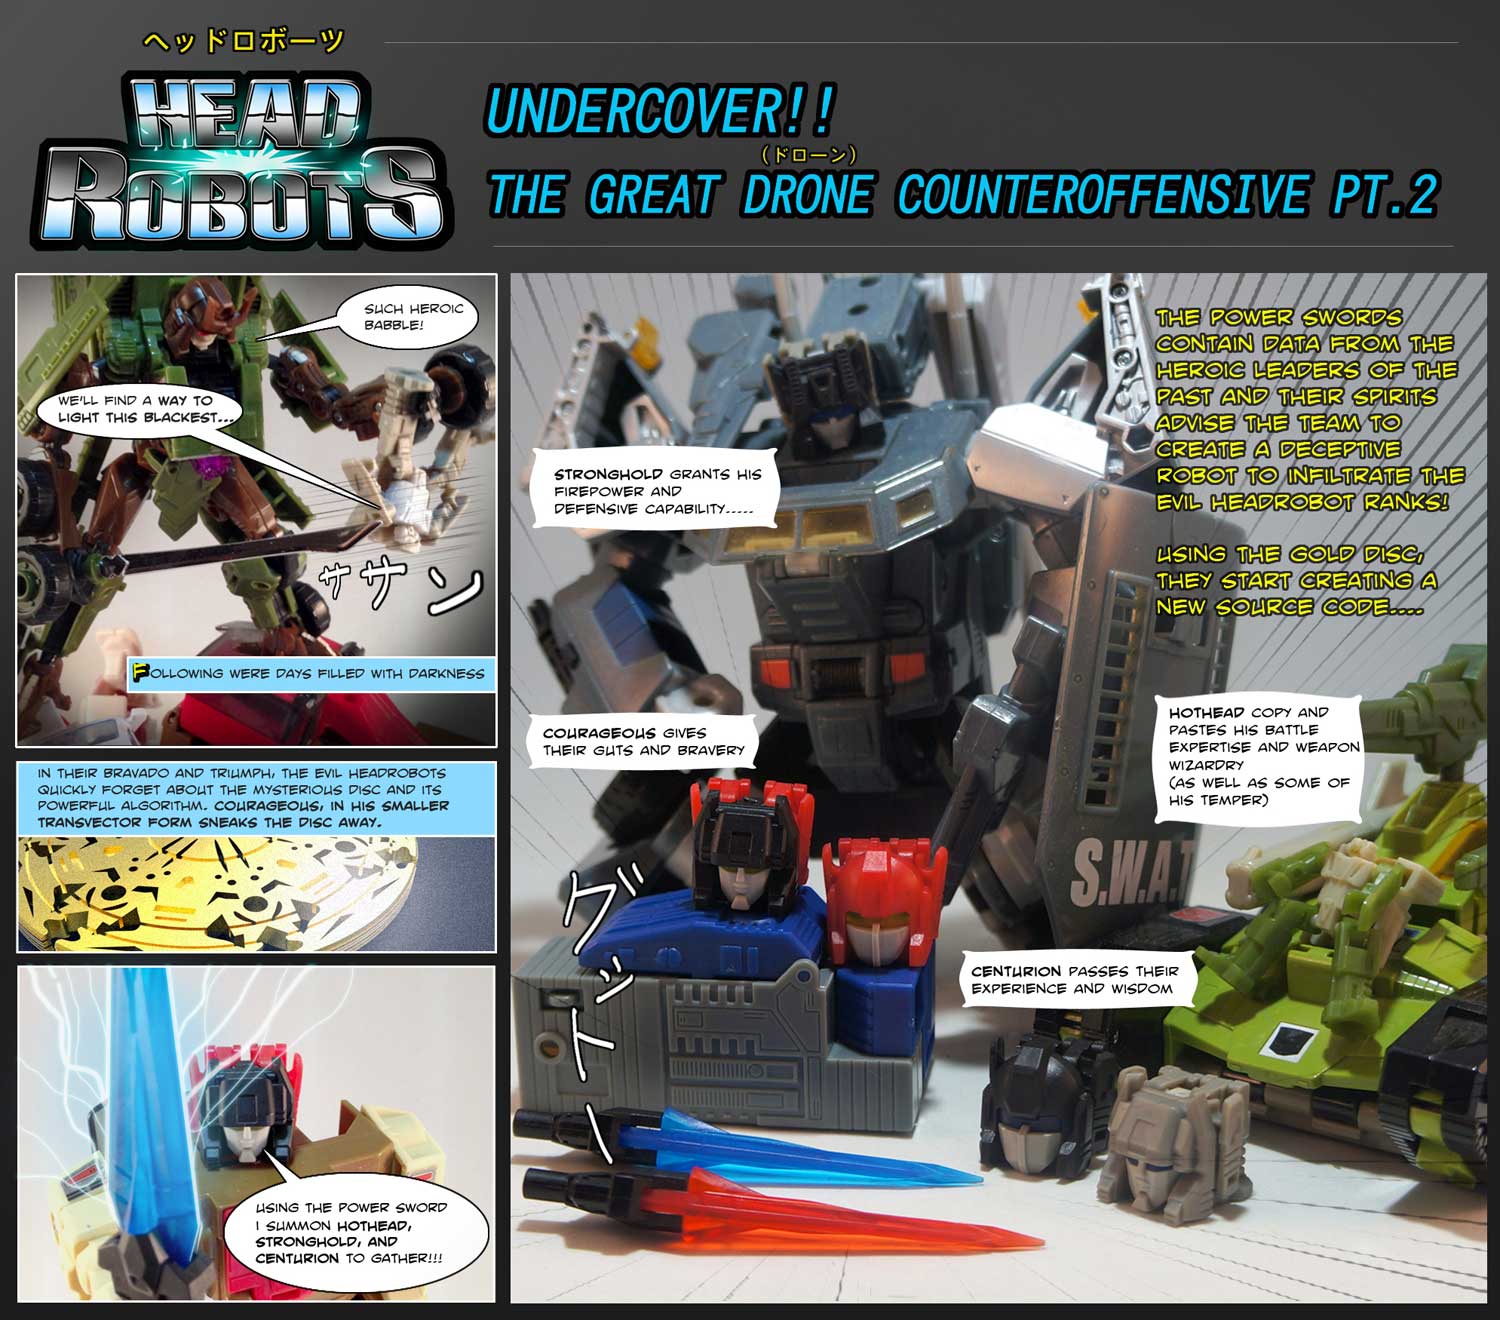 Undercover!! The Great Drone Counteroffensive page 2